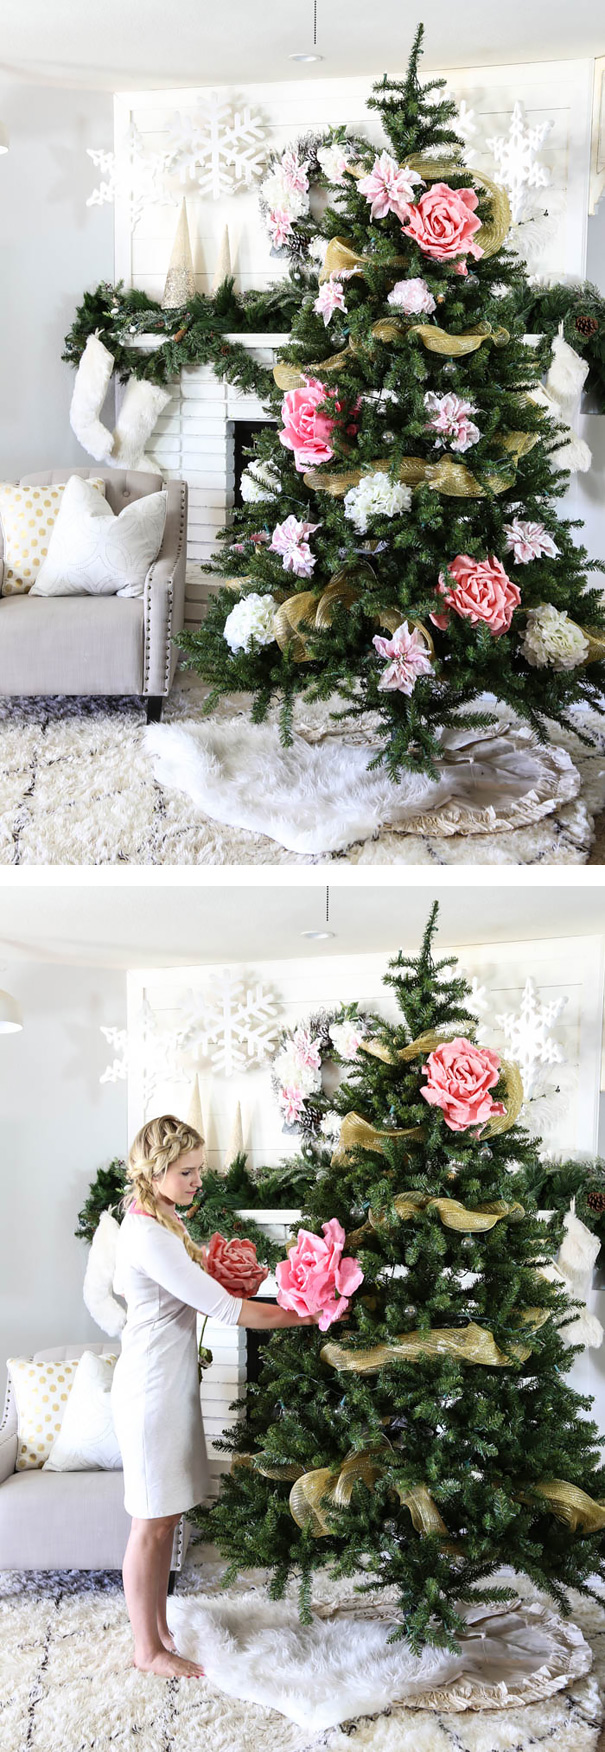 AD-Floral-Christmas-Tree-Decorating-Ideas-08